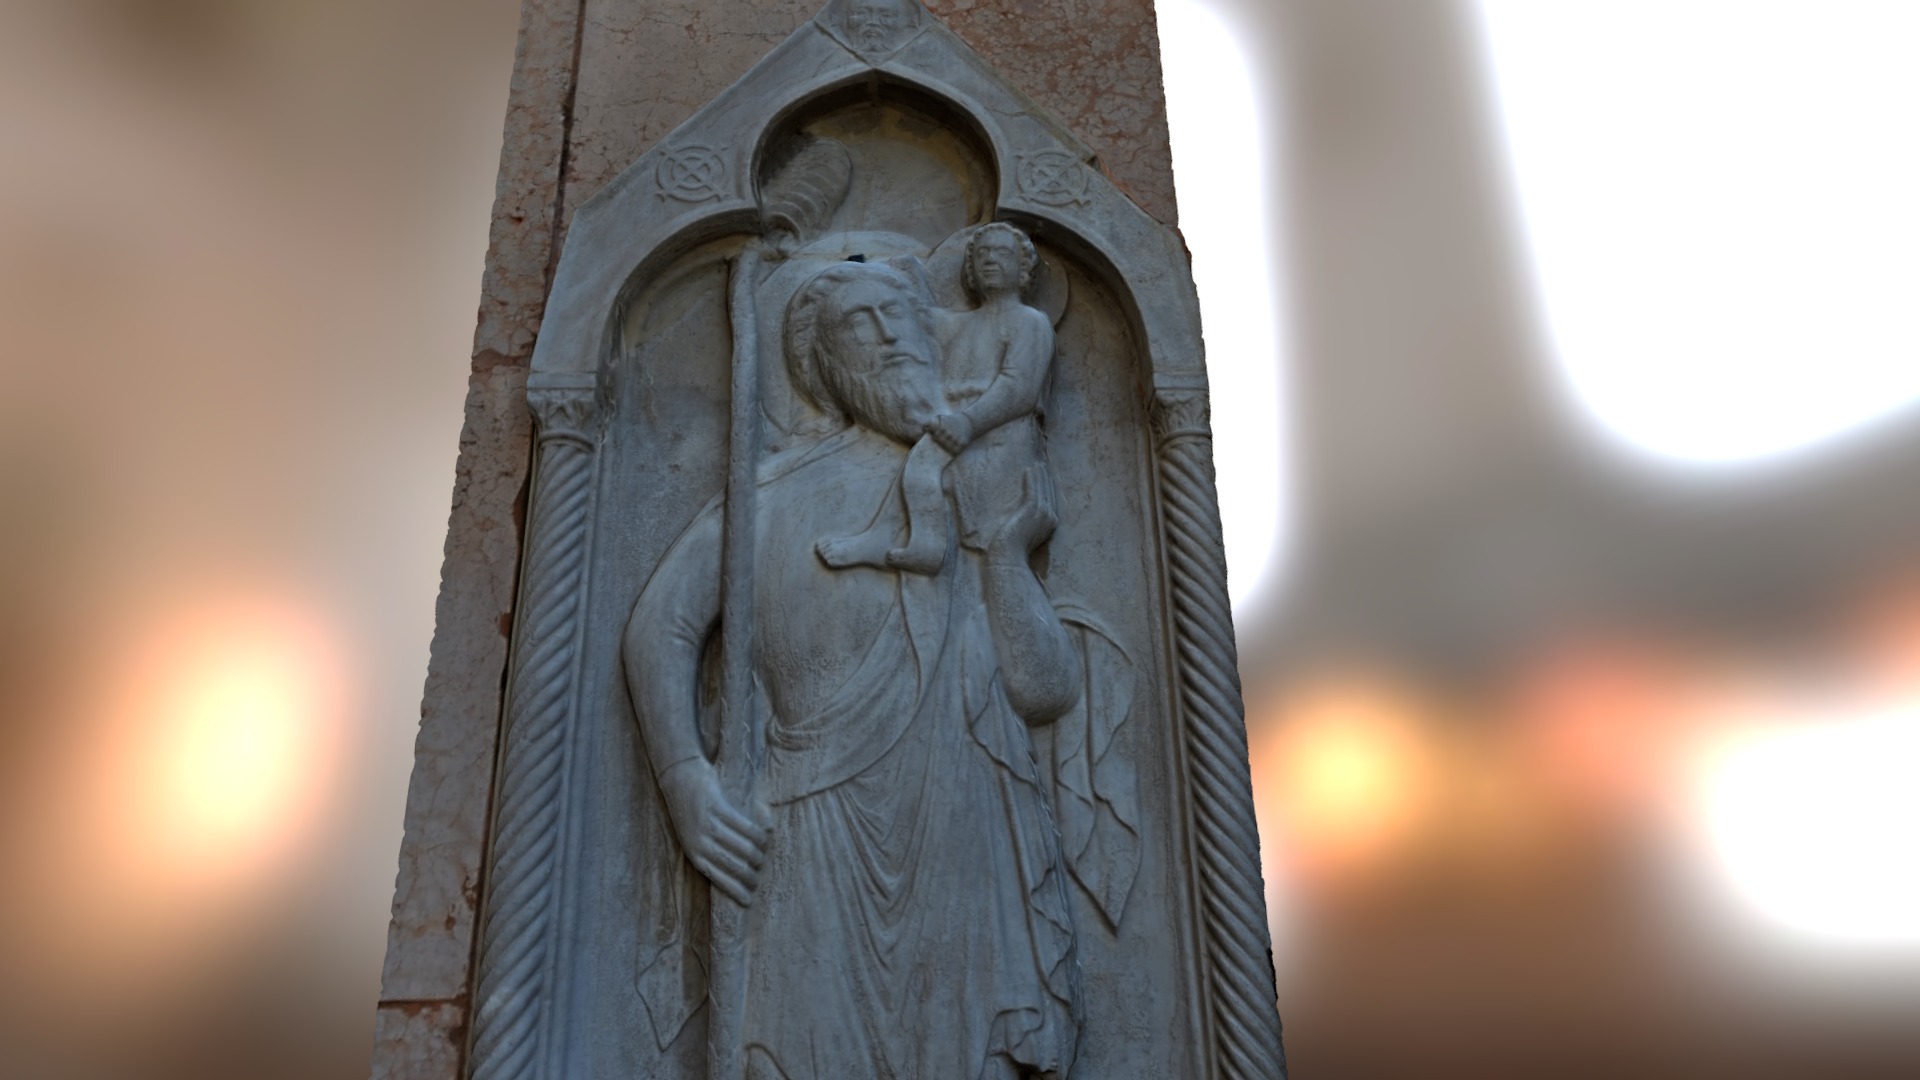 3D model Saint from Venice - This is a 3D model of the Saint from Venice. The 3D model is about a stone carving of a man and woman.